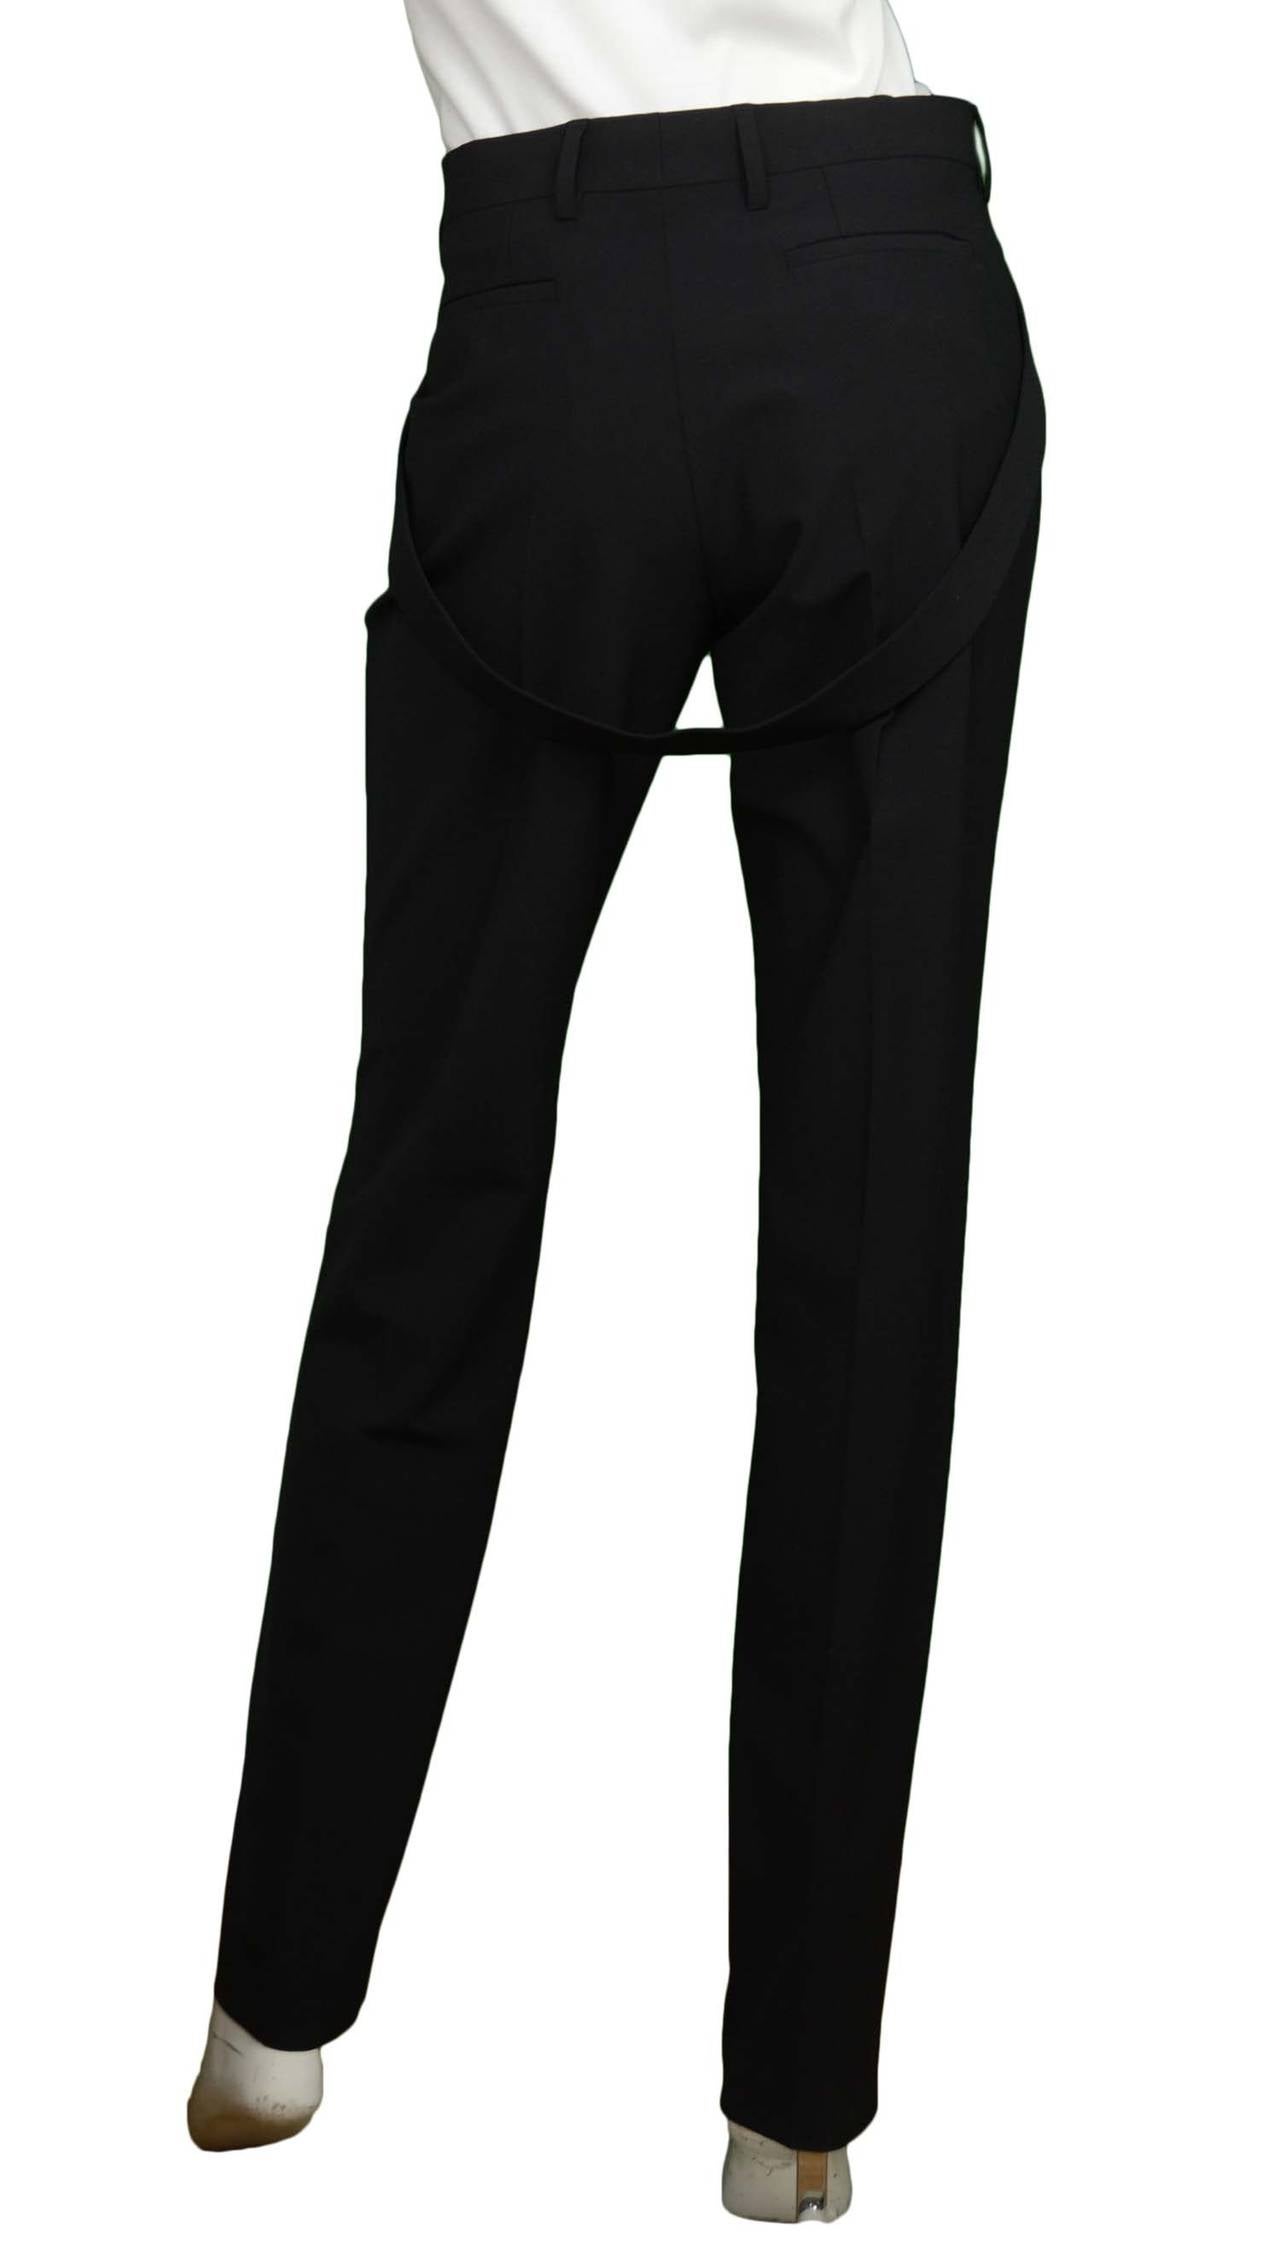 Women's GIVENCHY Black NWT Trousers W/ Belt Detail RT $1250